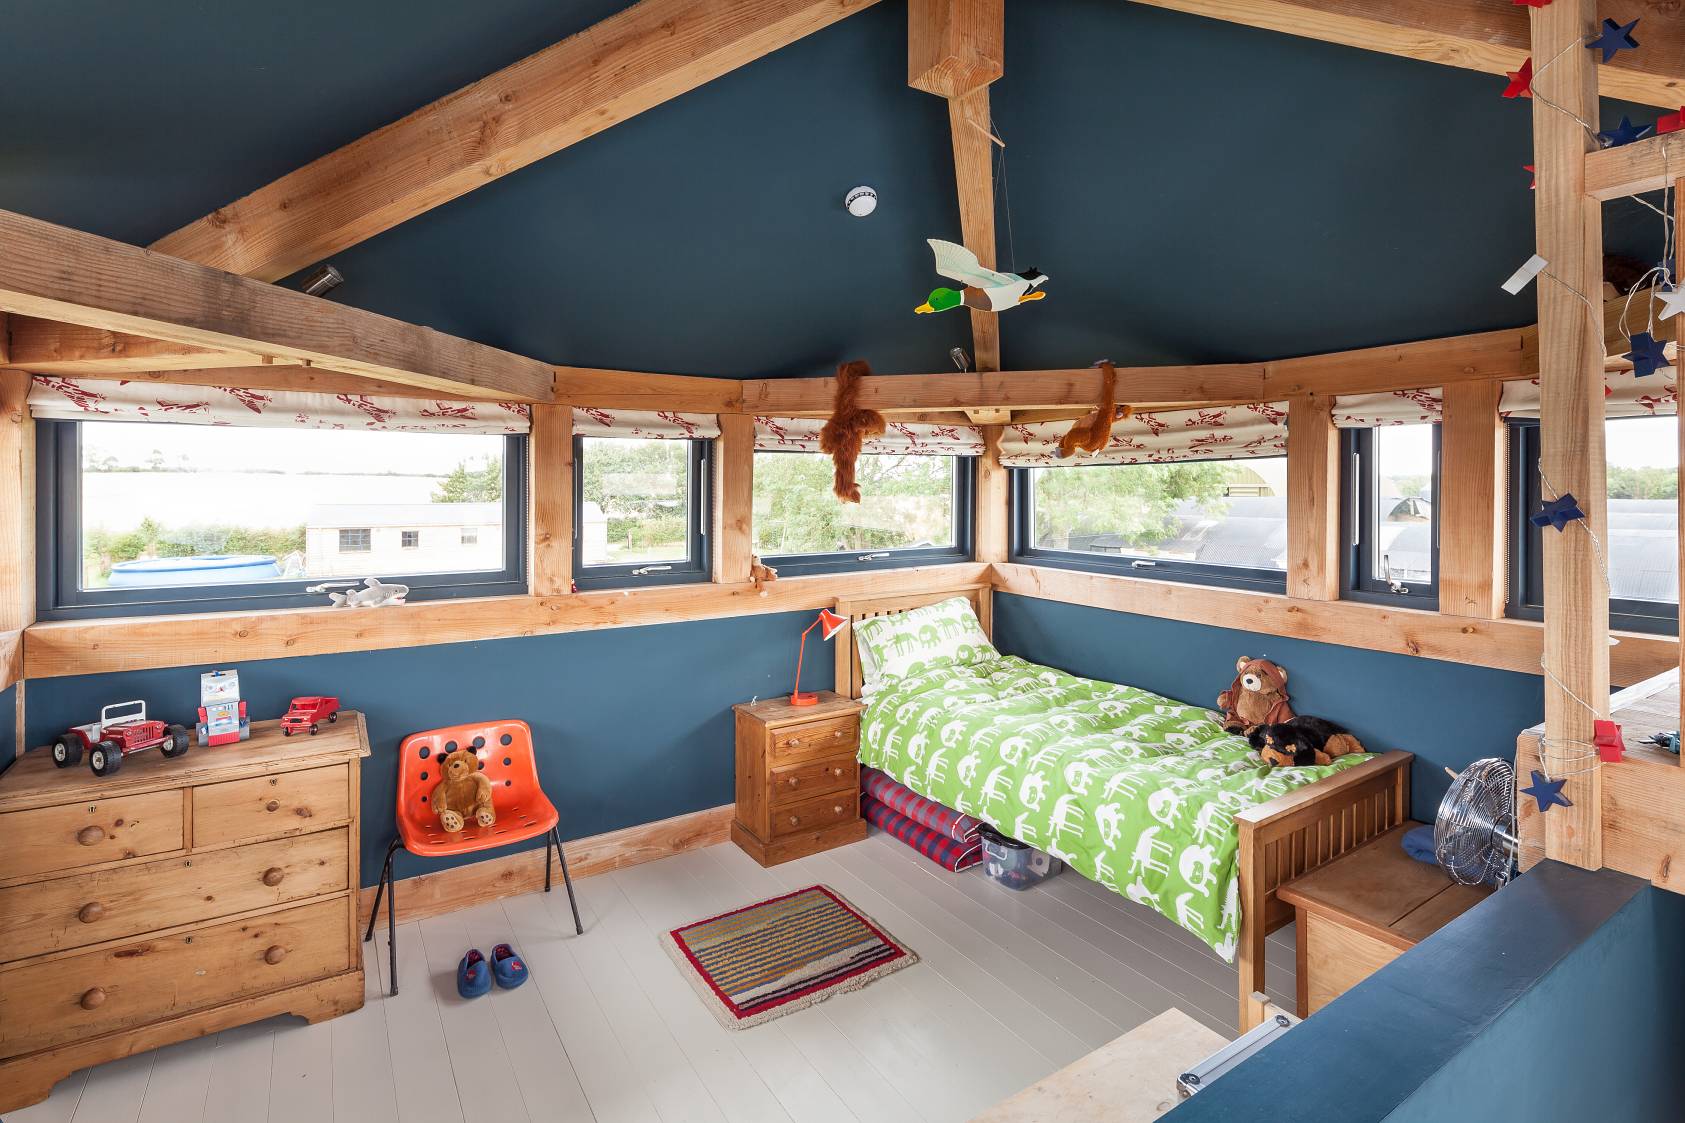 Kids Bedroom The Stunning Kids Bedroom Design Inside The Allies Farmhouse Applied Natural Wood Storage On Corner And Bed On Other Side Dream Homes Stunning Rustic Contemporary Home With Bright Interior Accents